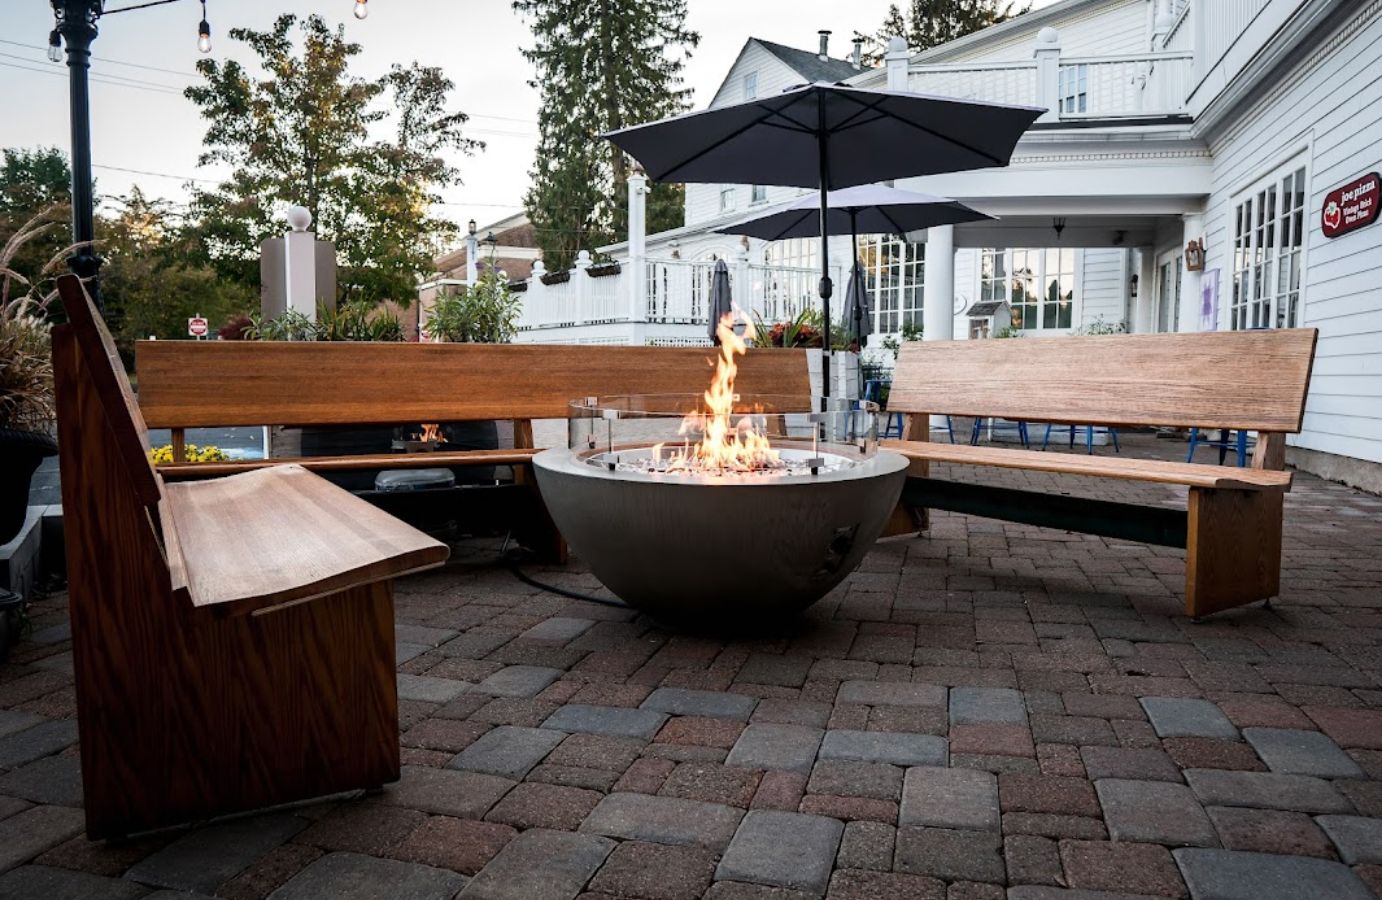 Outside, seating by a fire pit